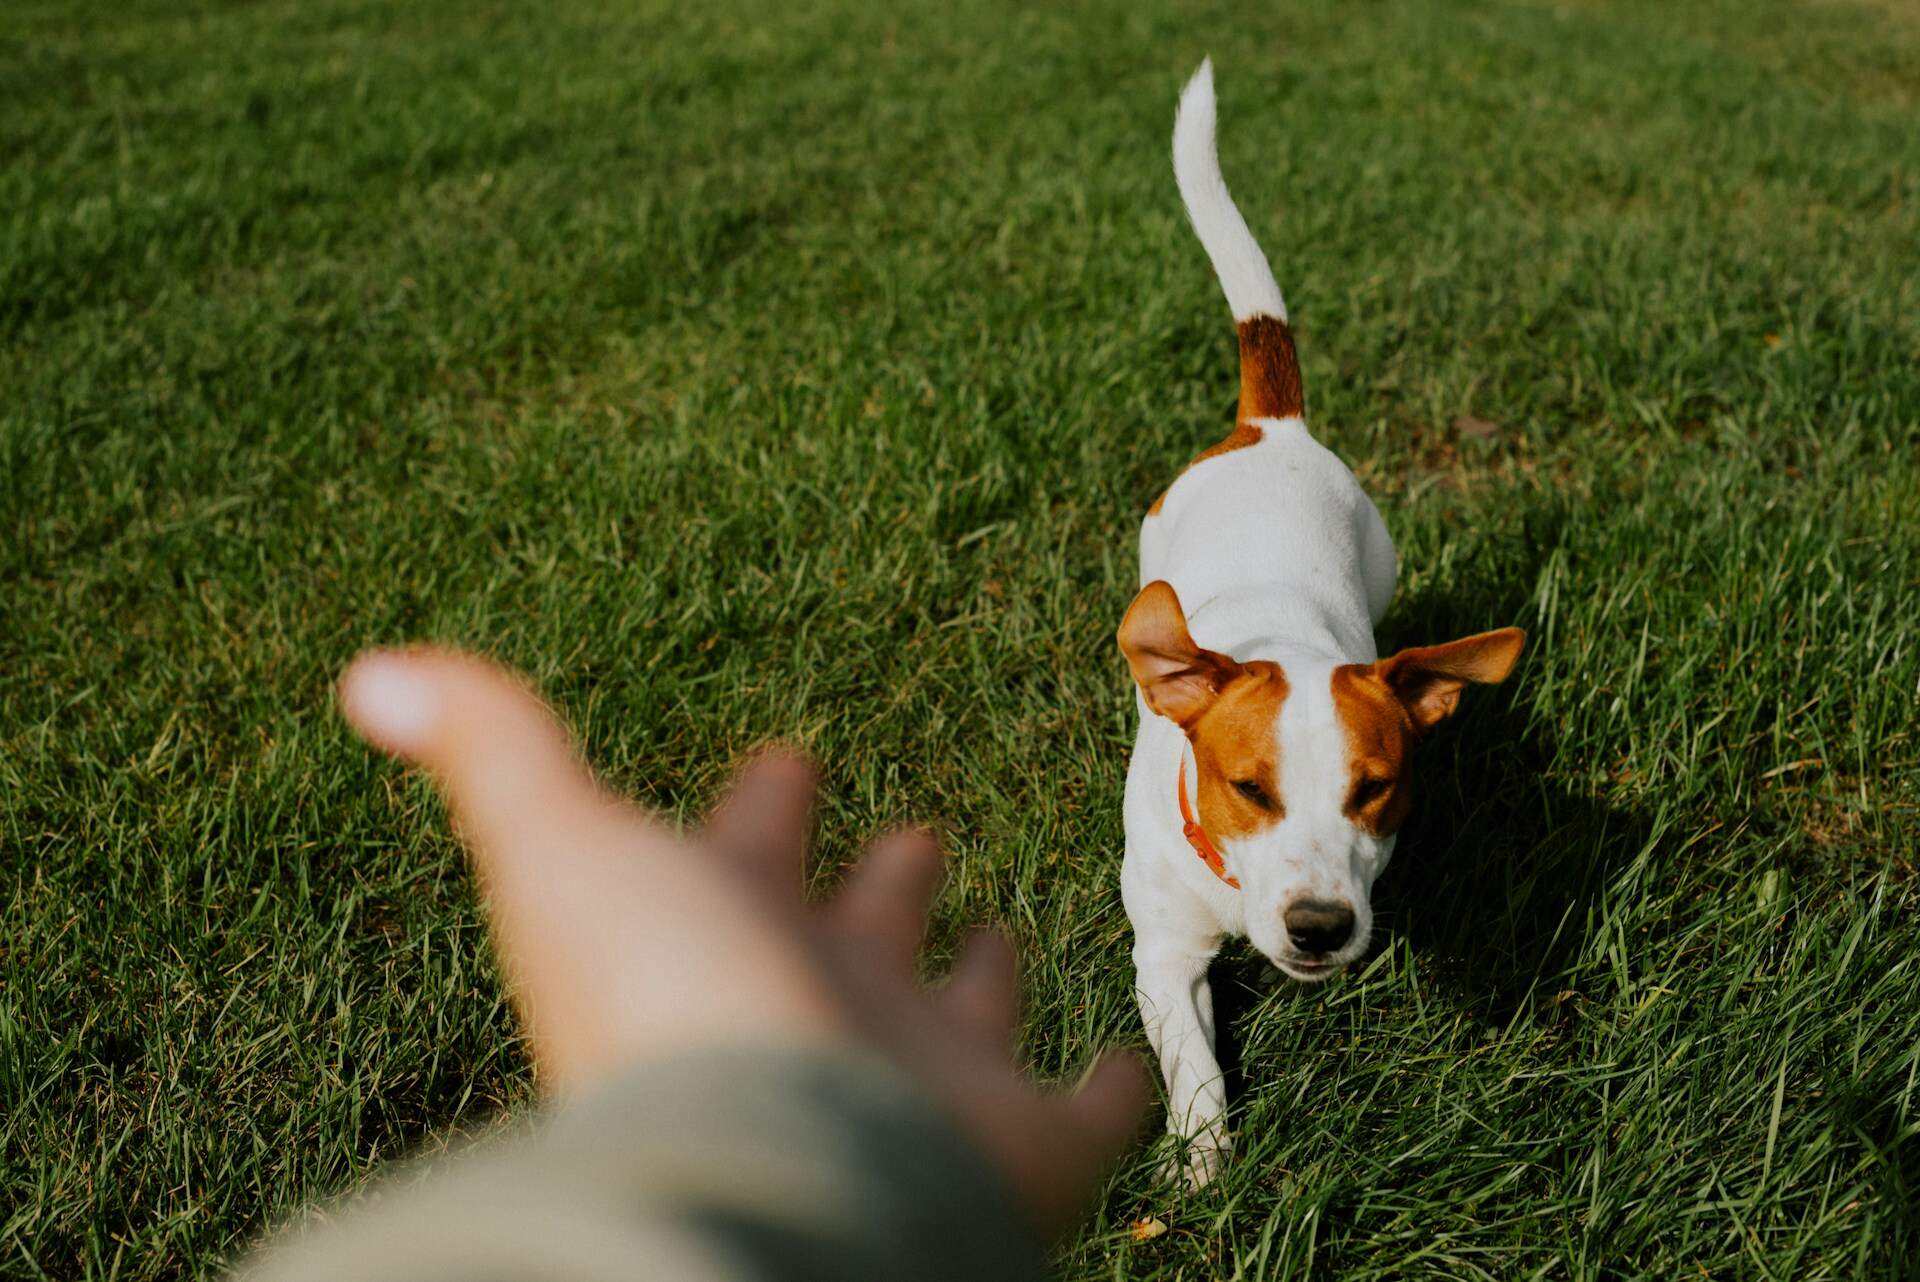 A Jack Rusell terrier walking on a grassy lawn